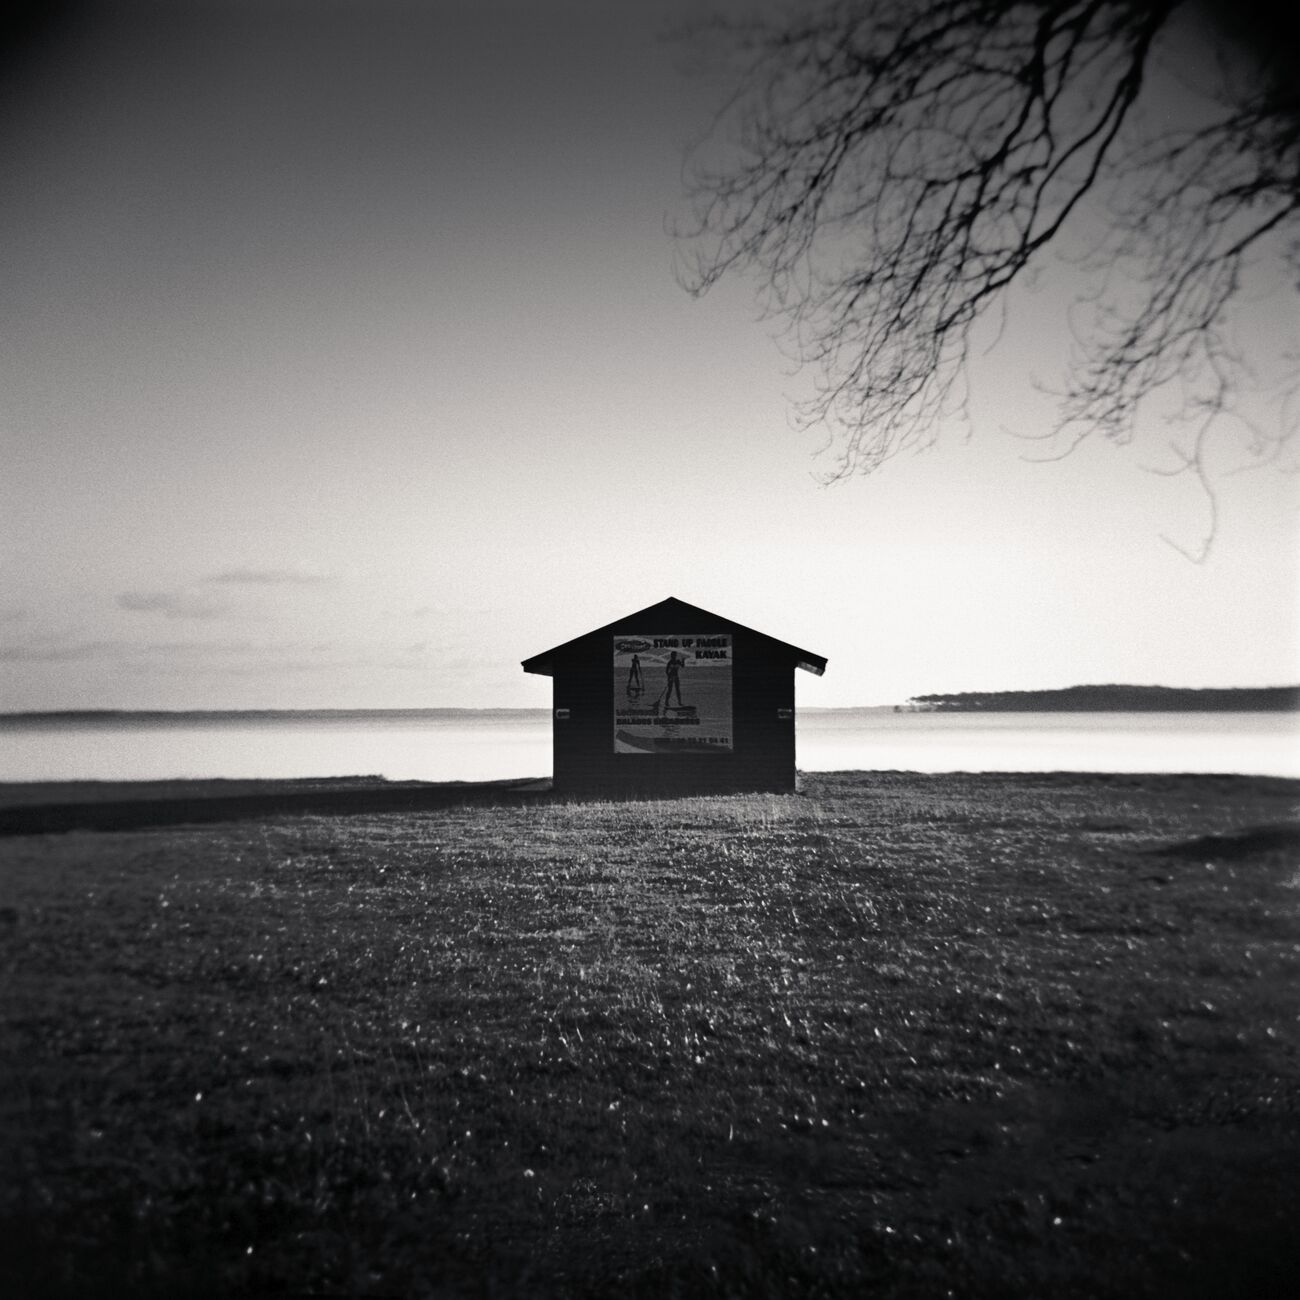 Shed By The Lake, Etude 1, Carreyre, Lacanau Lake, France. January 2021. Ref-1408 - Denis Olivier Photography